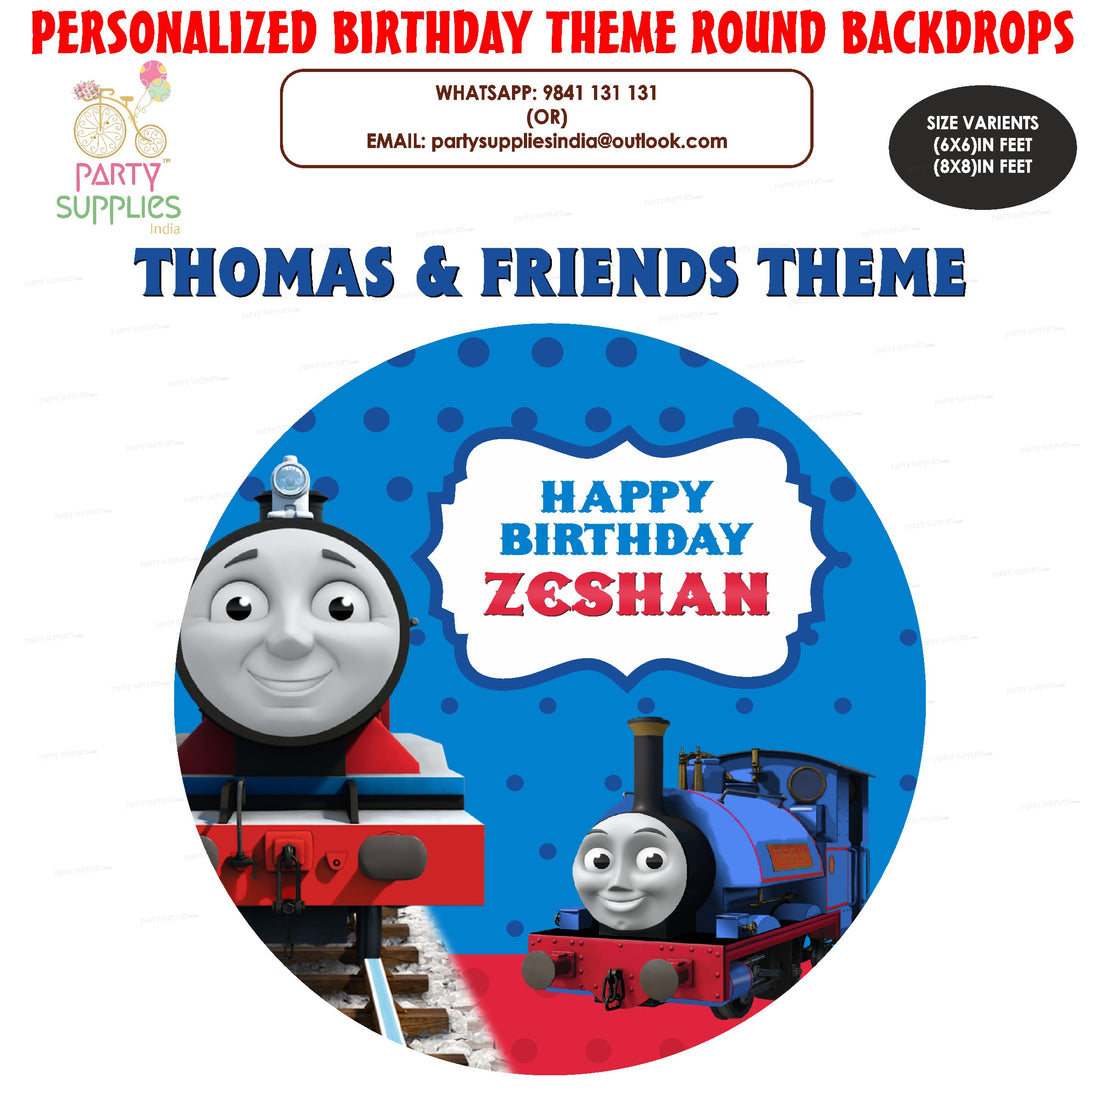 PSI Thomas and Friends Theme Personalized Round Backdrop